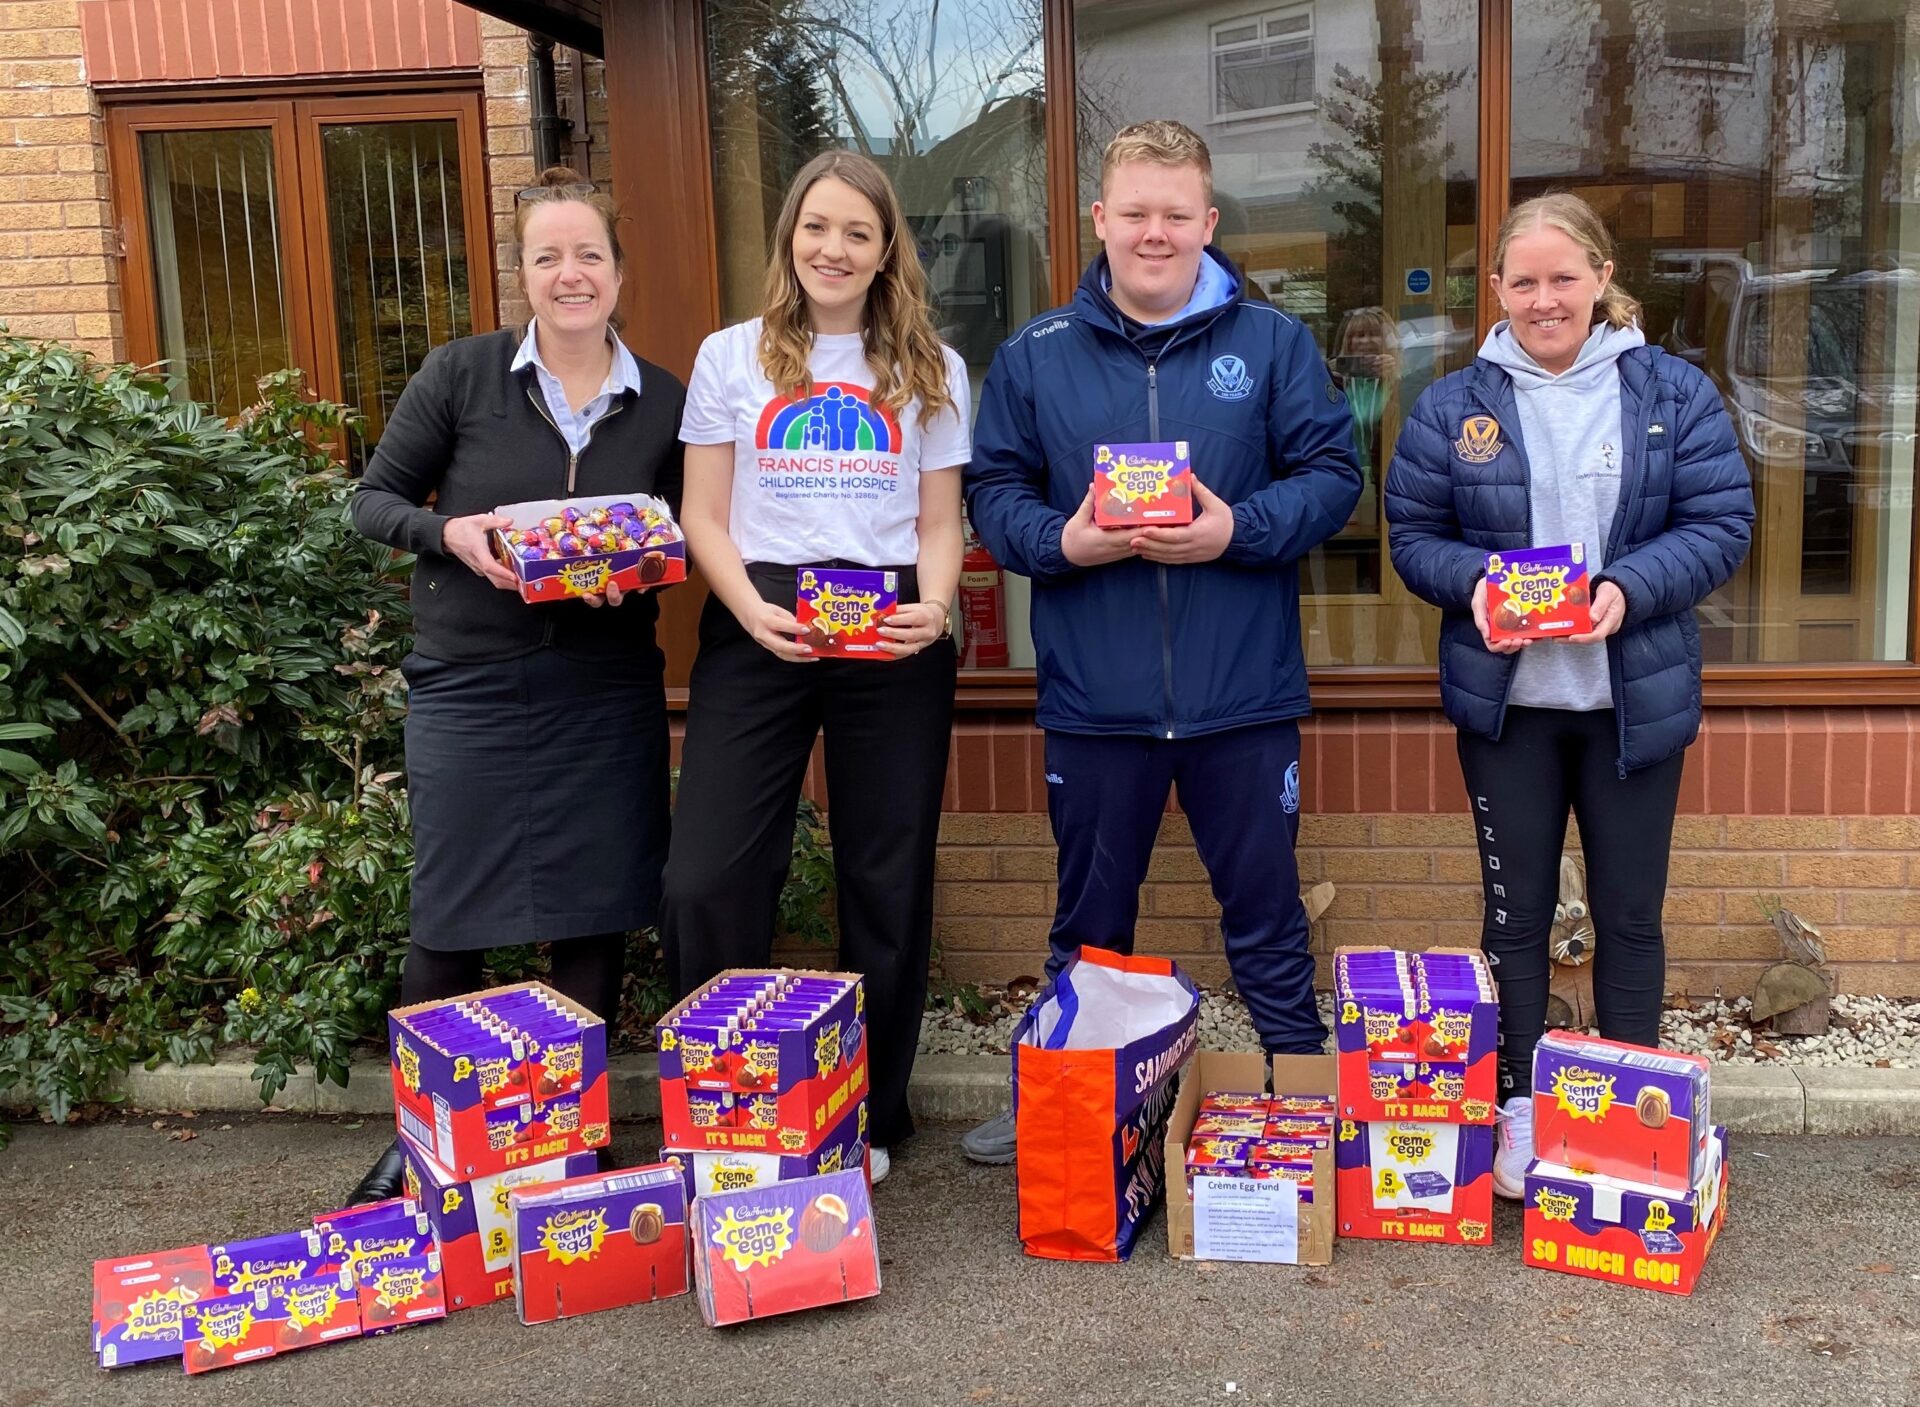 Four people stood behind boxes of chocolate eggs